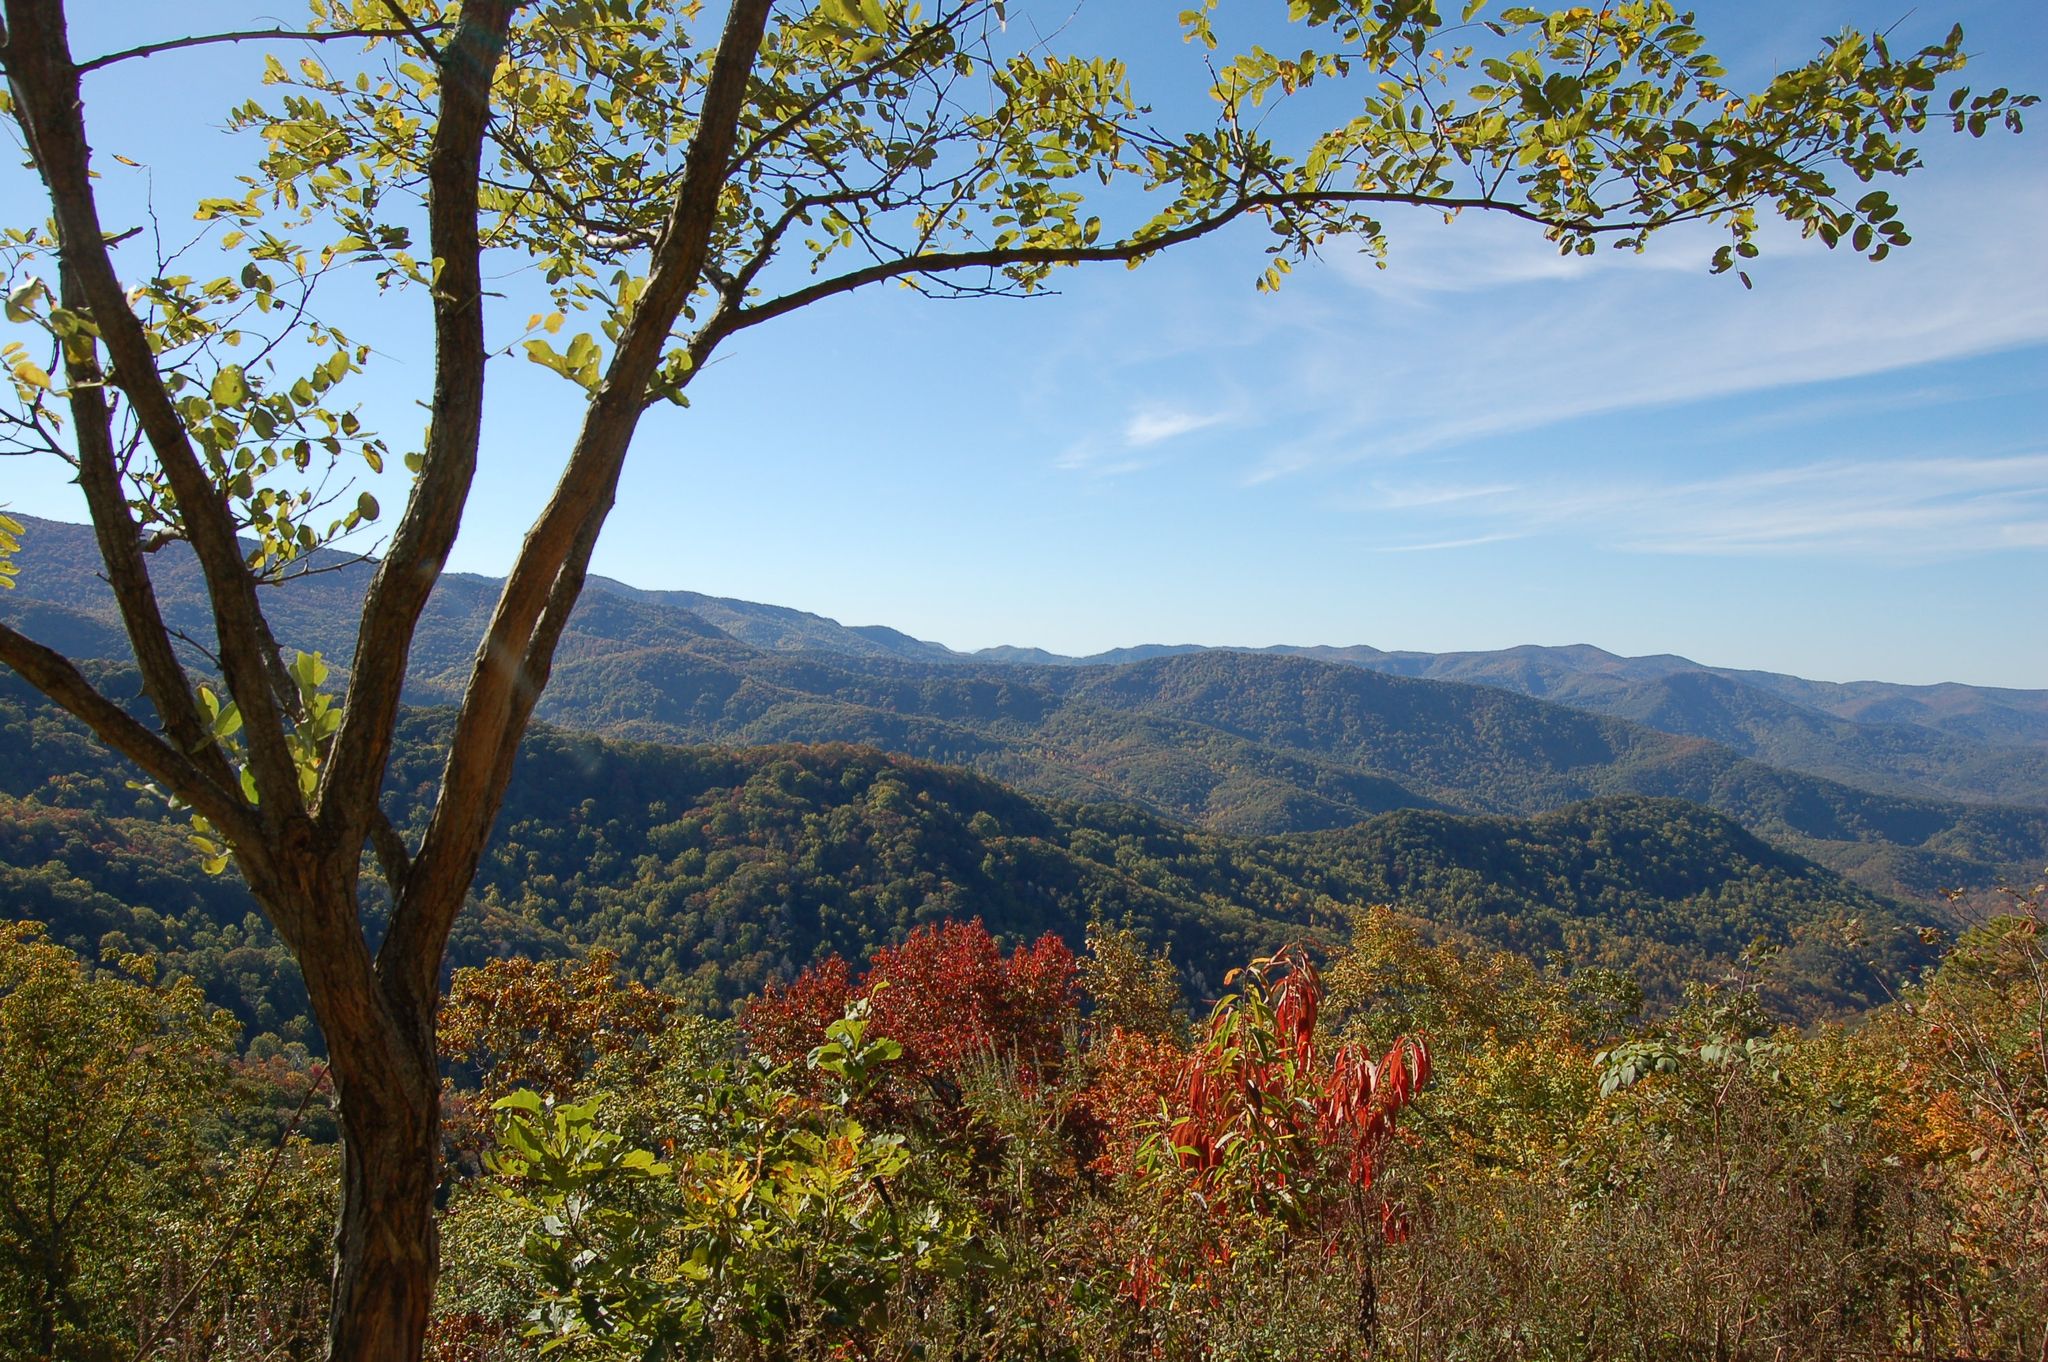 Enjoy the view from the Tellico River Road on the Cherokee National Forest in North Carolina.